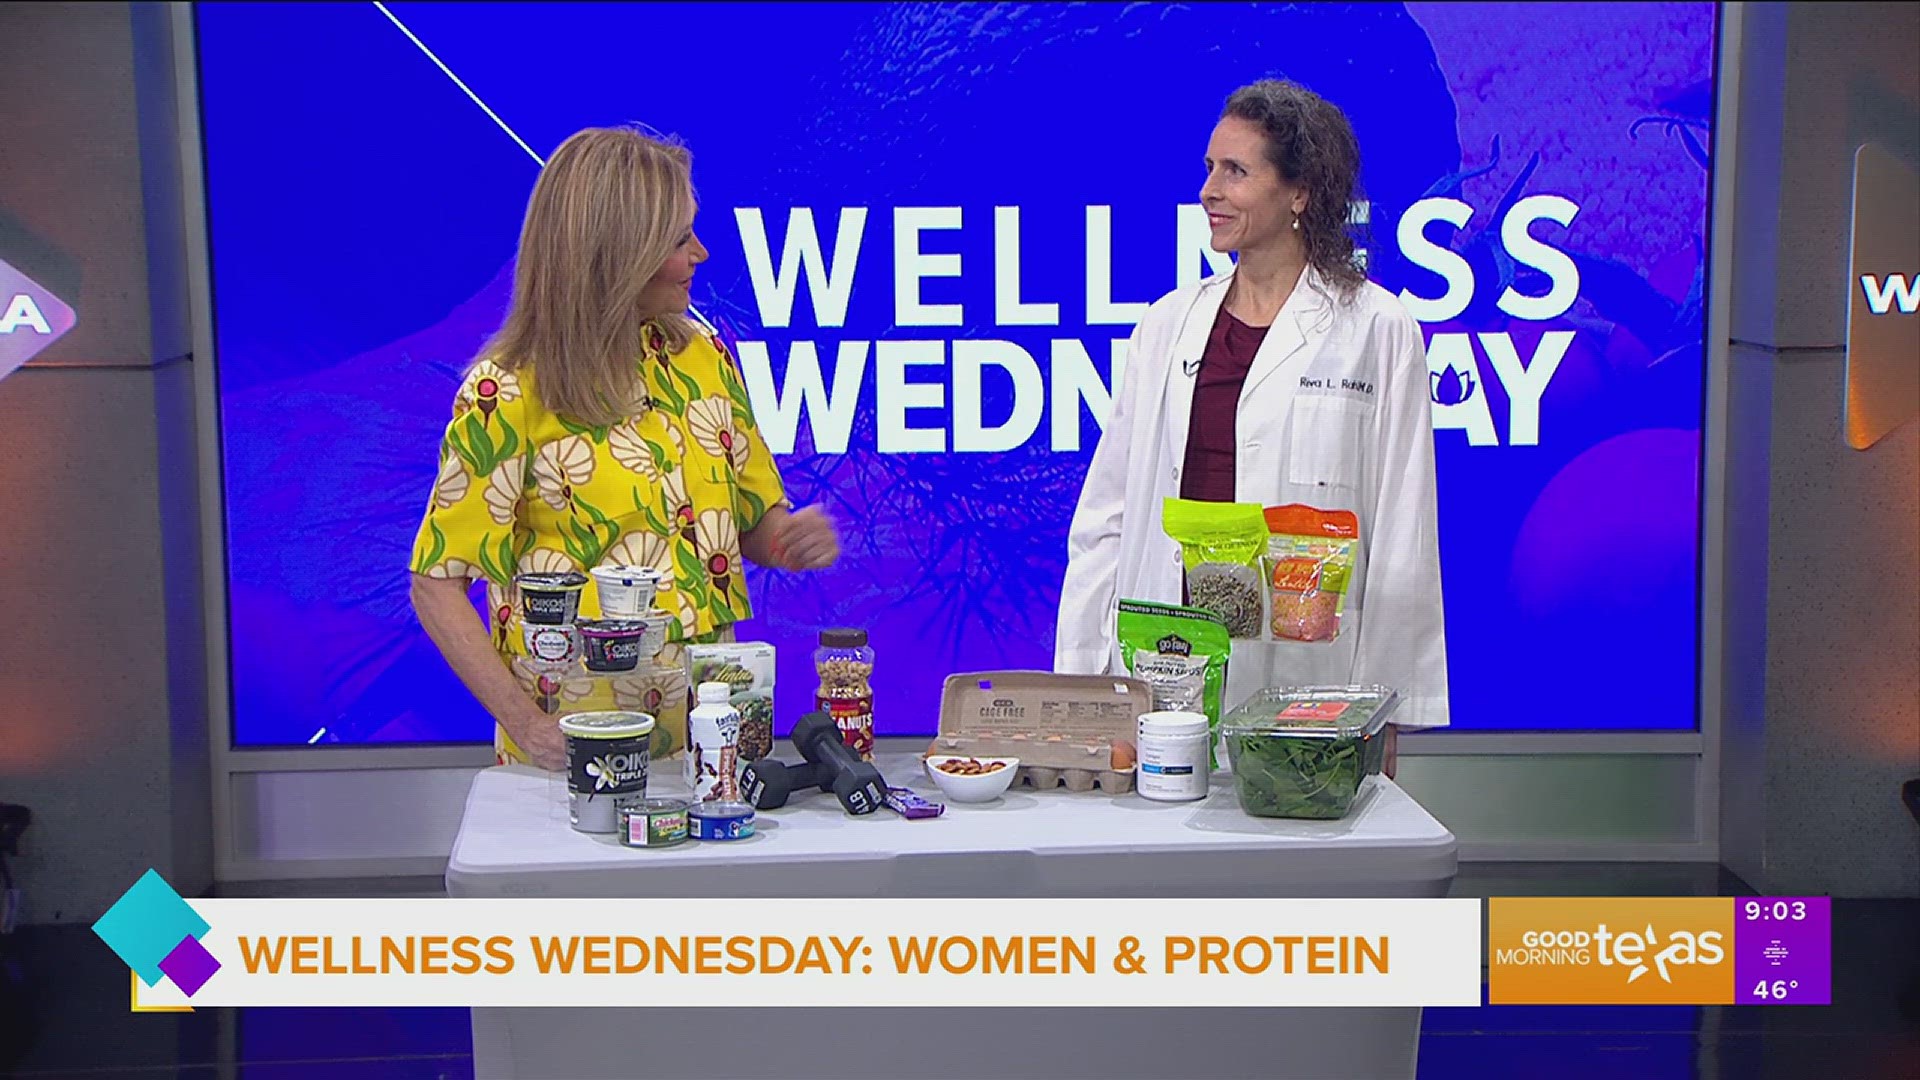 Dr. Riva Rahl of the Cooper Clinic breaks down how much protein women need in their daily diet as well as some protein source suggestions.